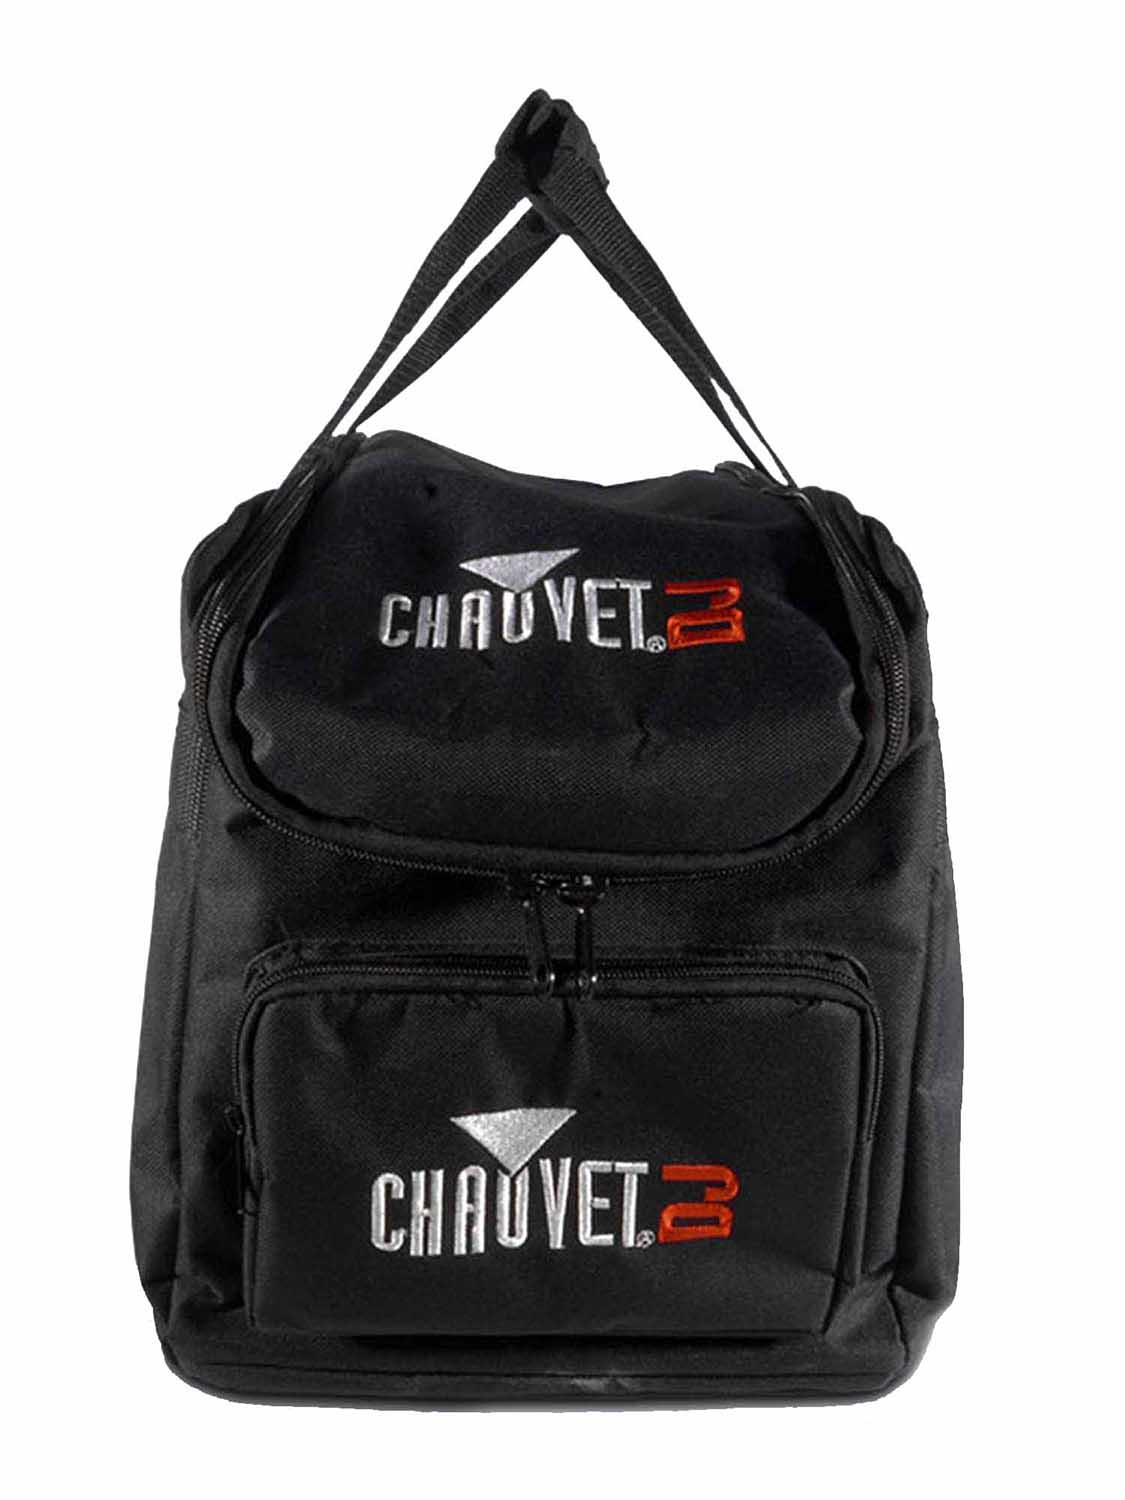 Chauvet DJ Package with 2 Intimidator Scan 360 LED Scanner and 2 CHS-30 VIP Gear Bag - Hollywood DJ